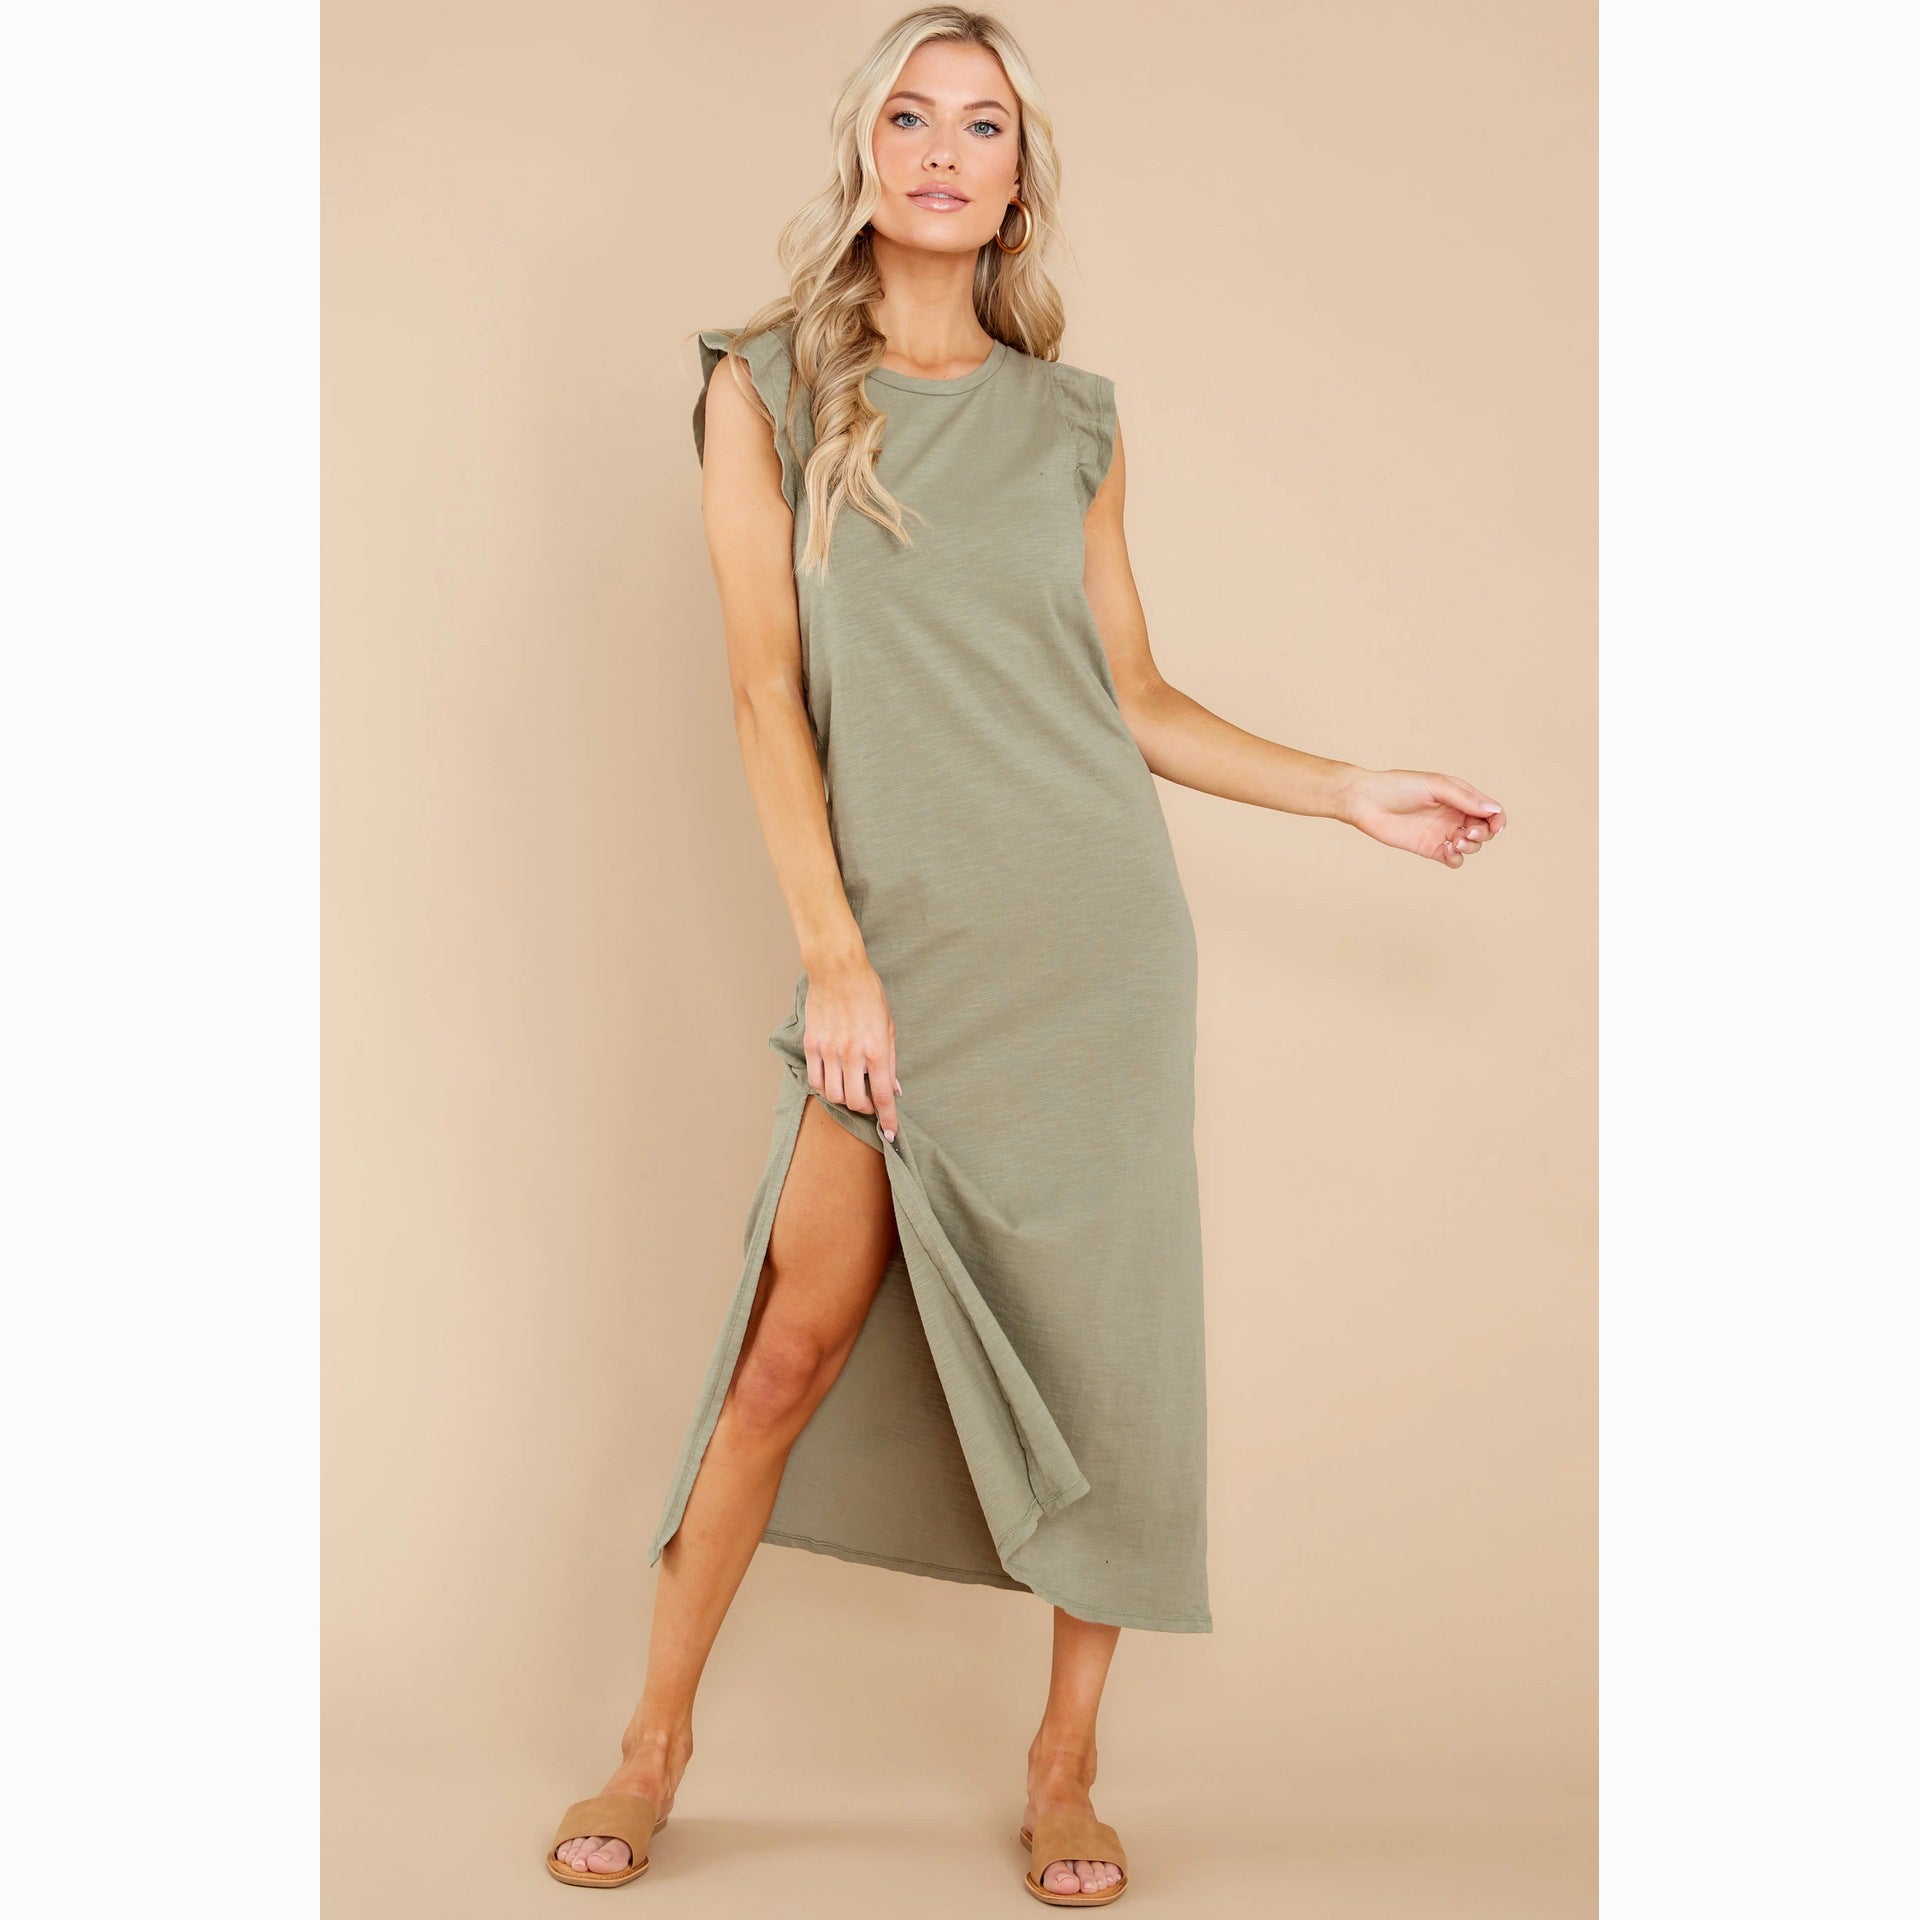 Casual Summer Wooden Ear A Line Trousers Knitted Dress - Ootddress